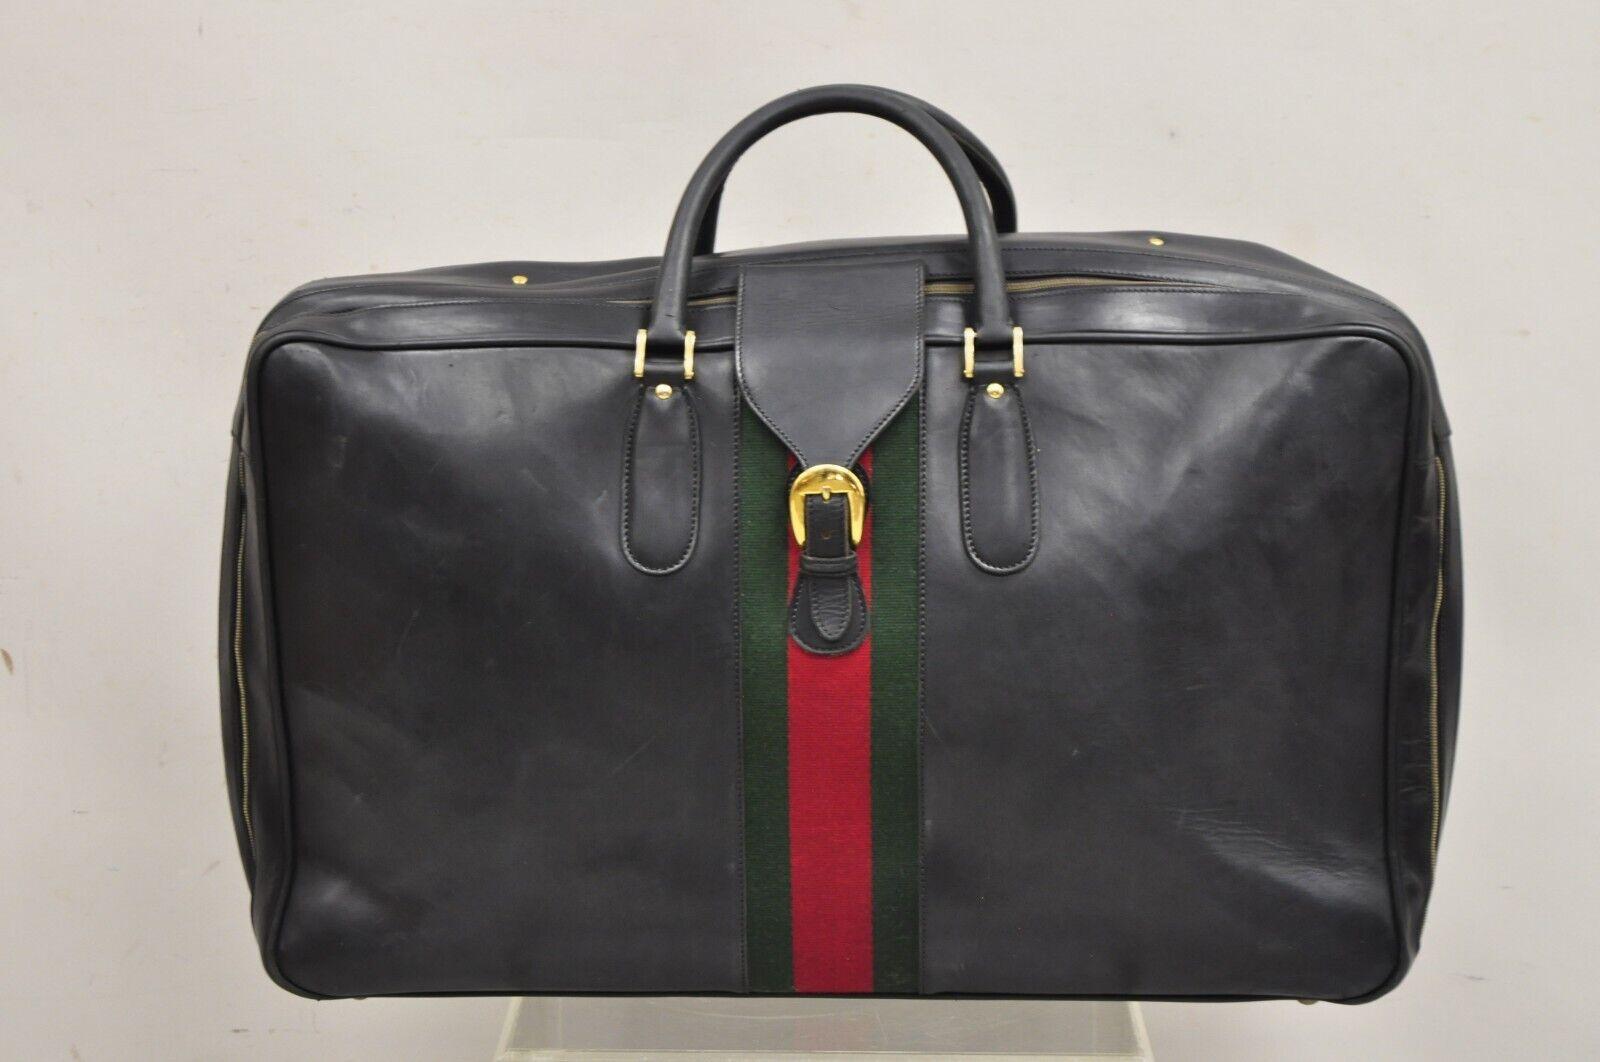 Vintage Gucci Large Black Leather Suitcase Luggage Travel Bag Green Red Webbing. Item featured is original vintage Gucci luggage, gold gilt 